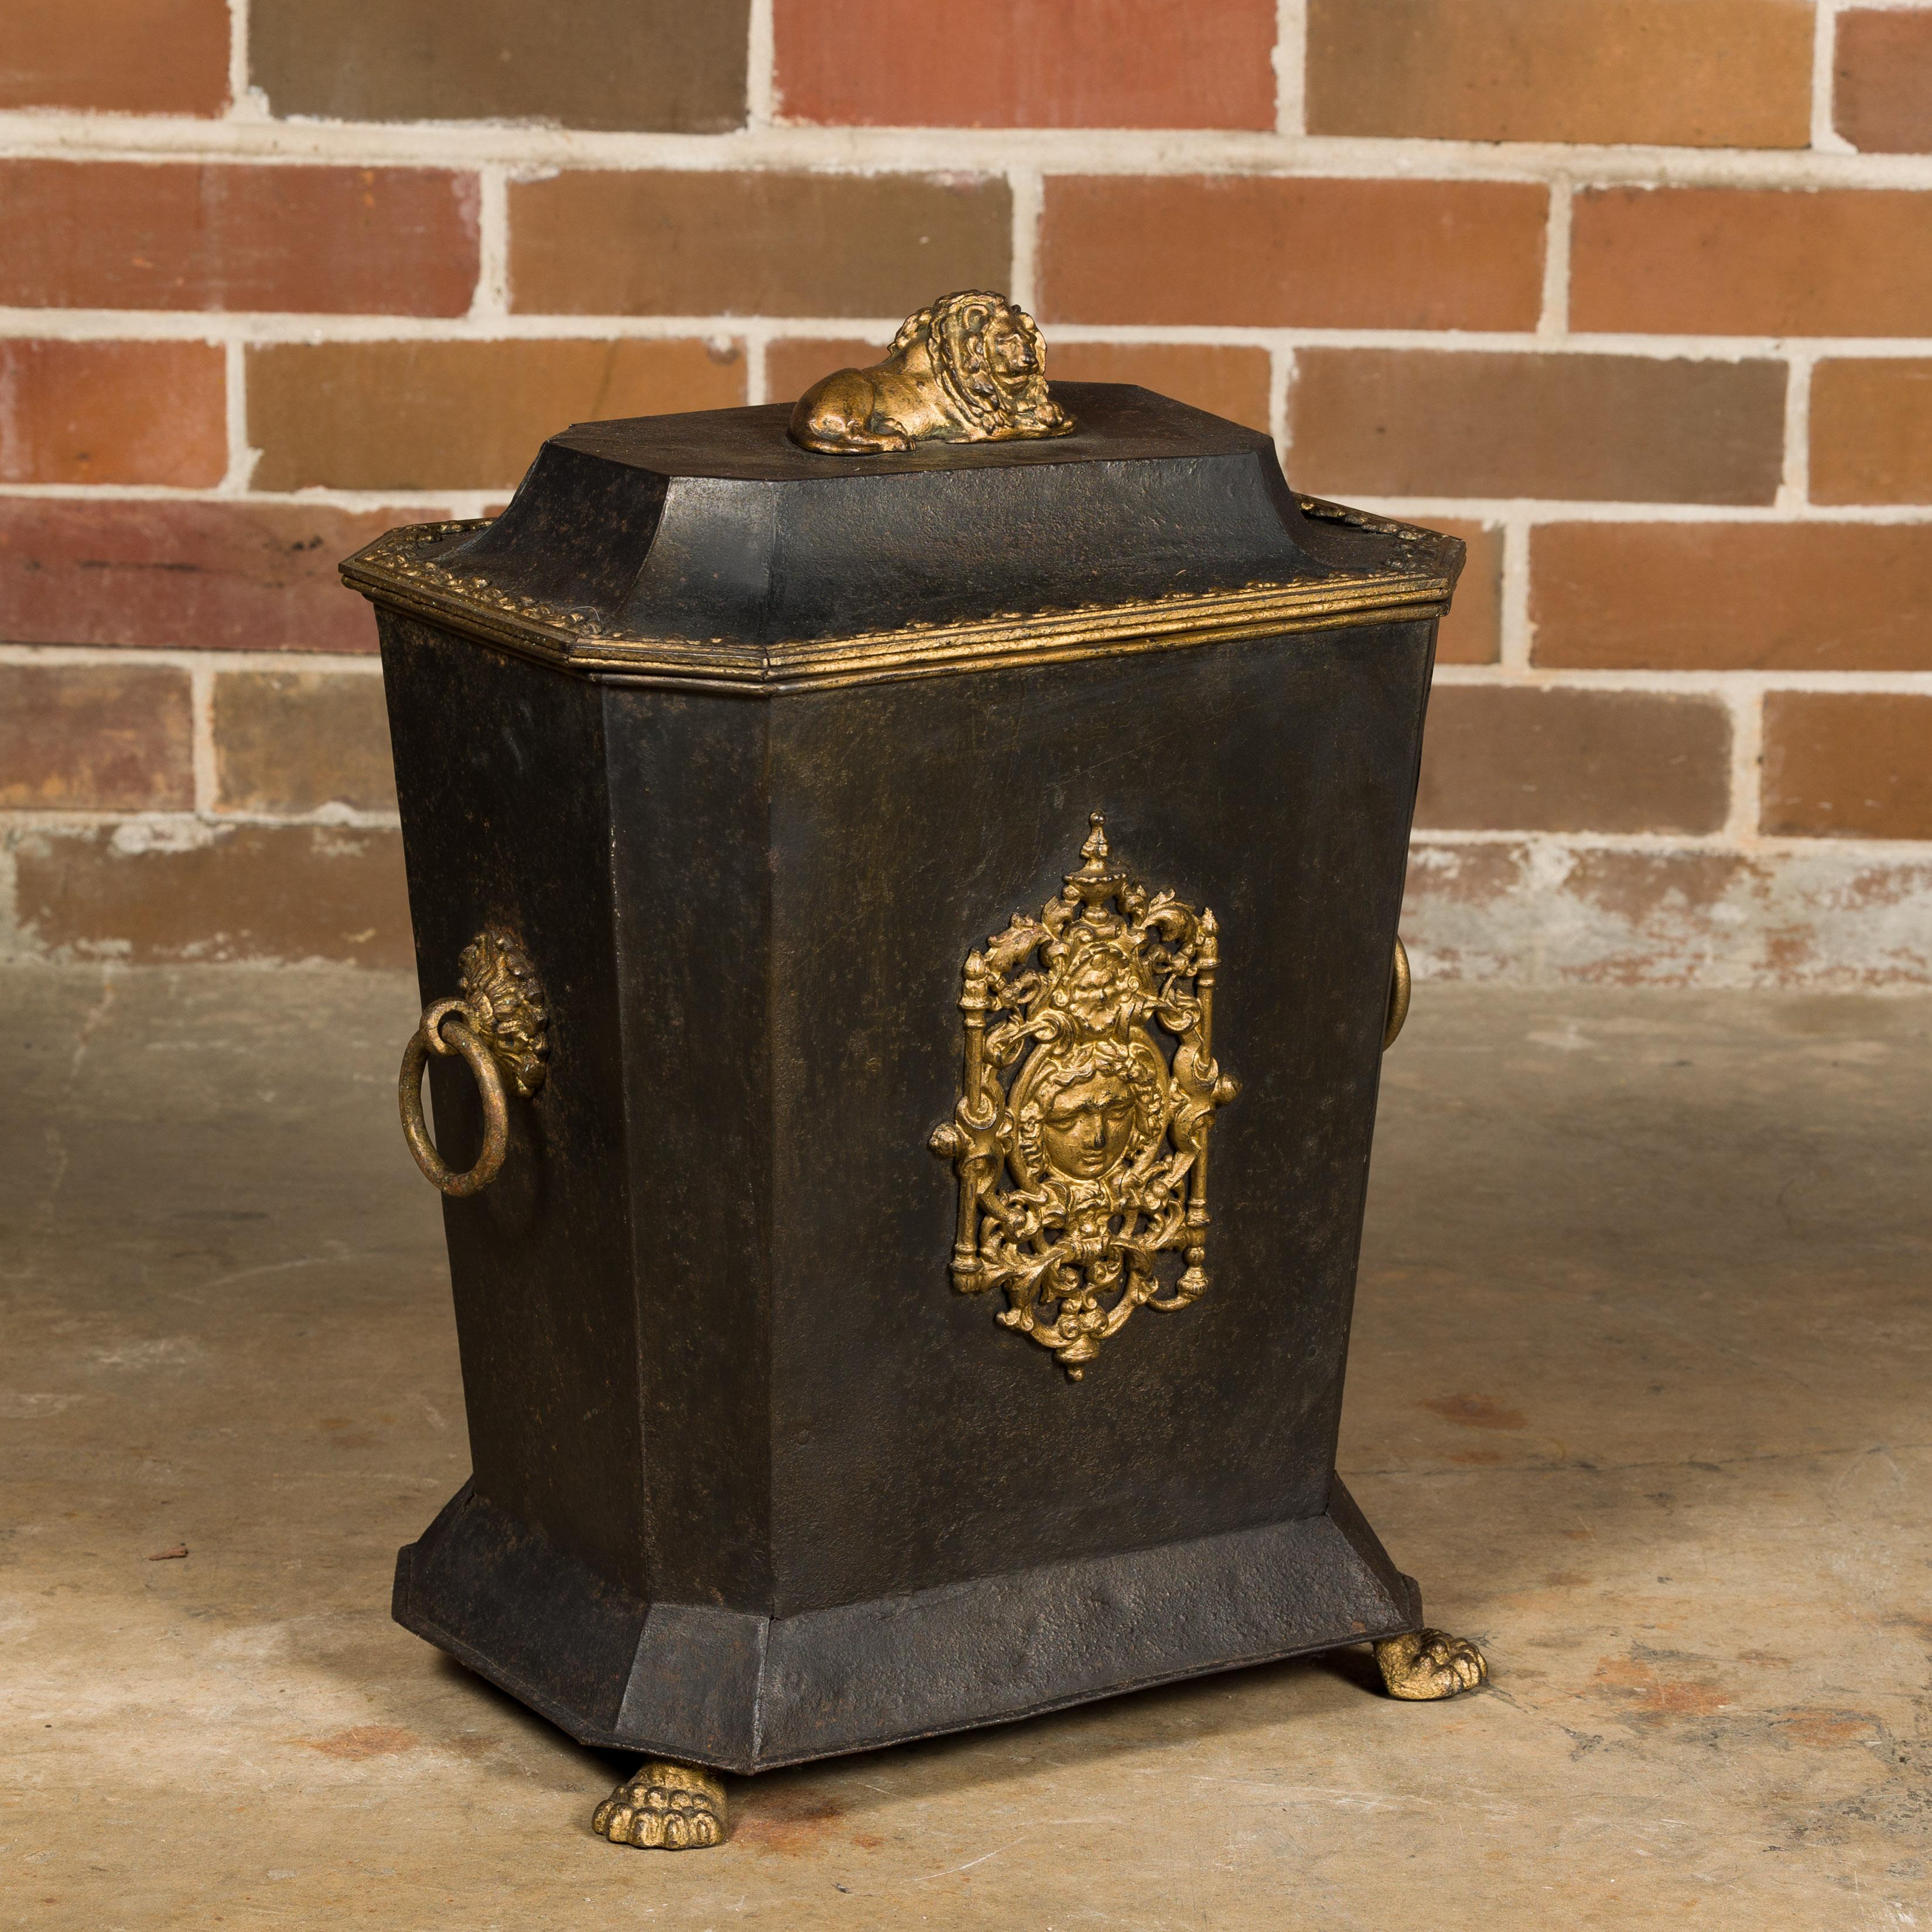 Gilt English Victorian Period 19th Century Black and Gold Tôle Coal Scuttle For Sale